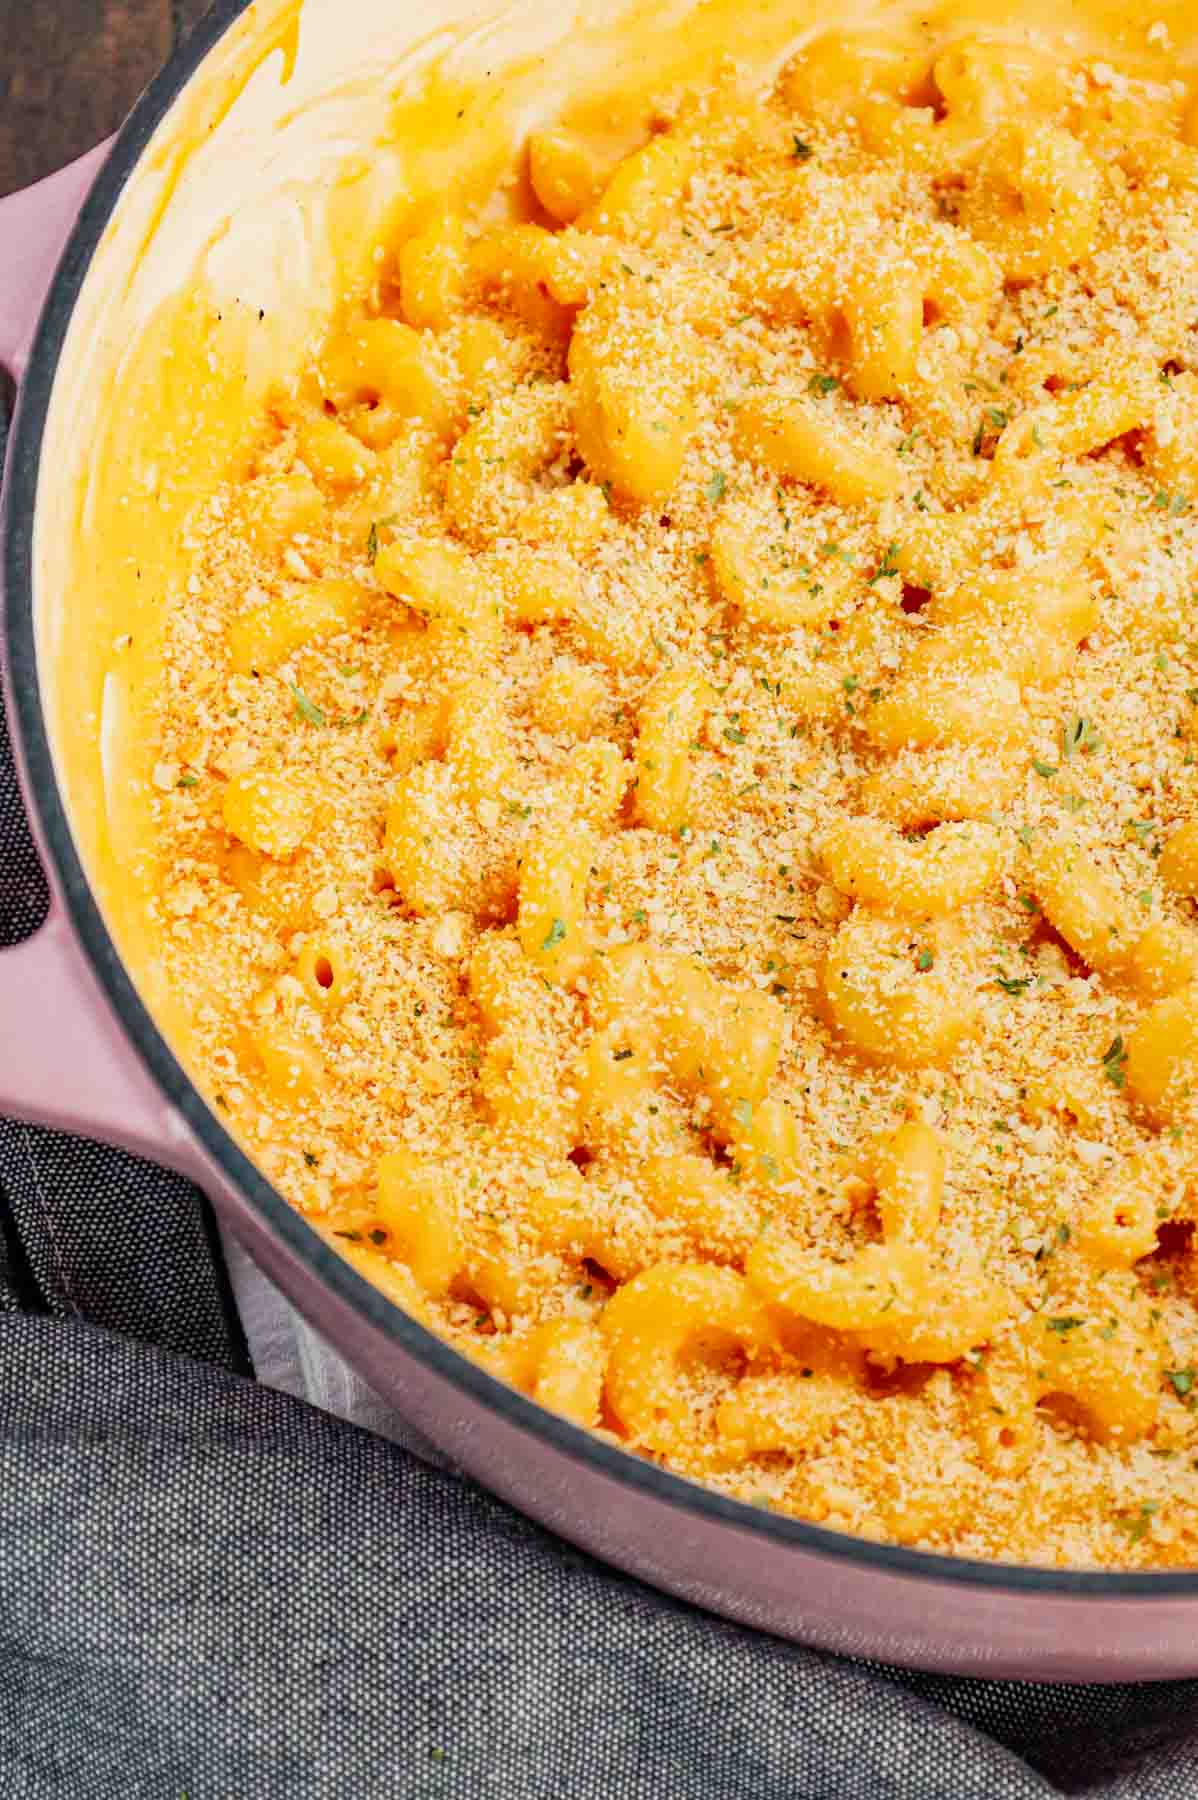 One Pot Mac and Cheese is a creamy and delicious pasta dish made with milk, cavatappi noodles, condensed cheddar soup, shredded cheddar cheese, mozzarella cheese, parmesan cheese and crushed Ritz crackers.